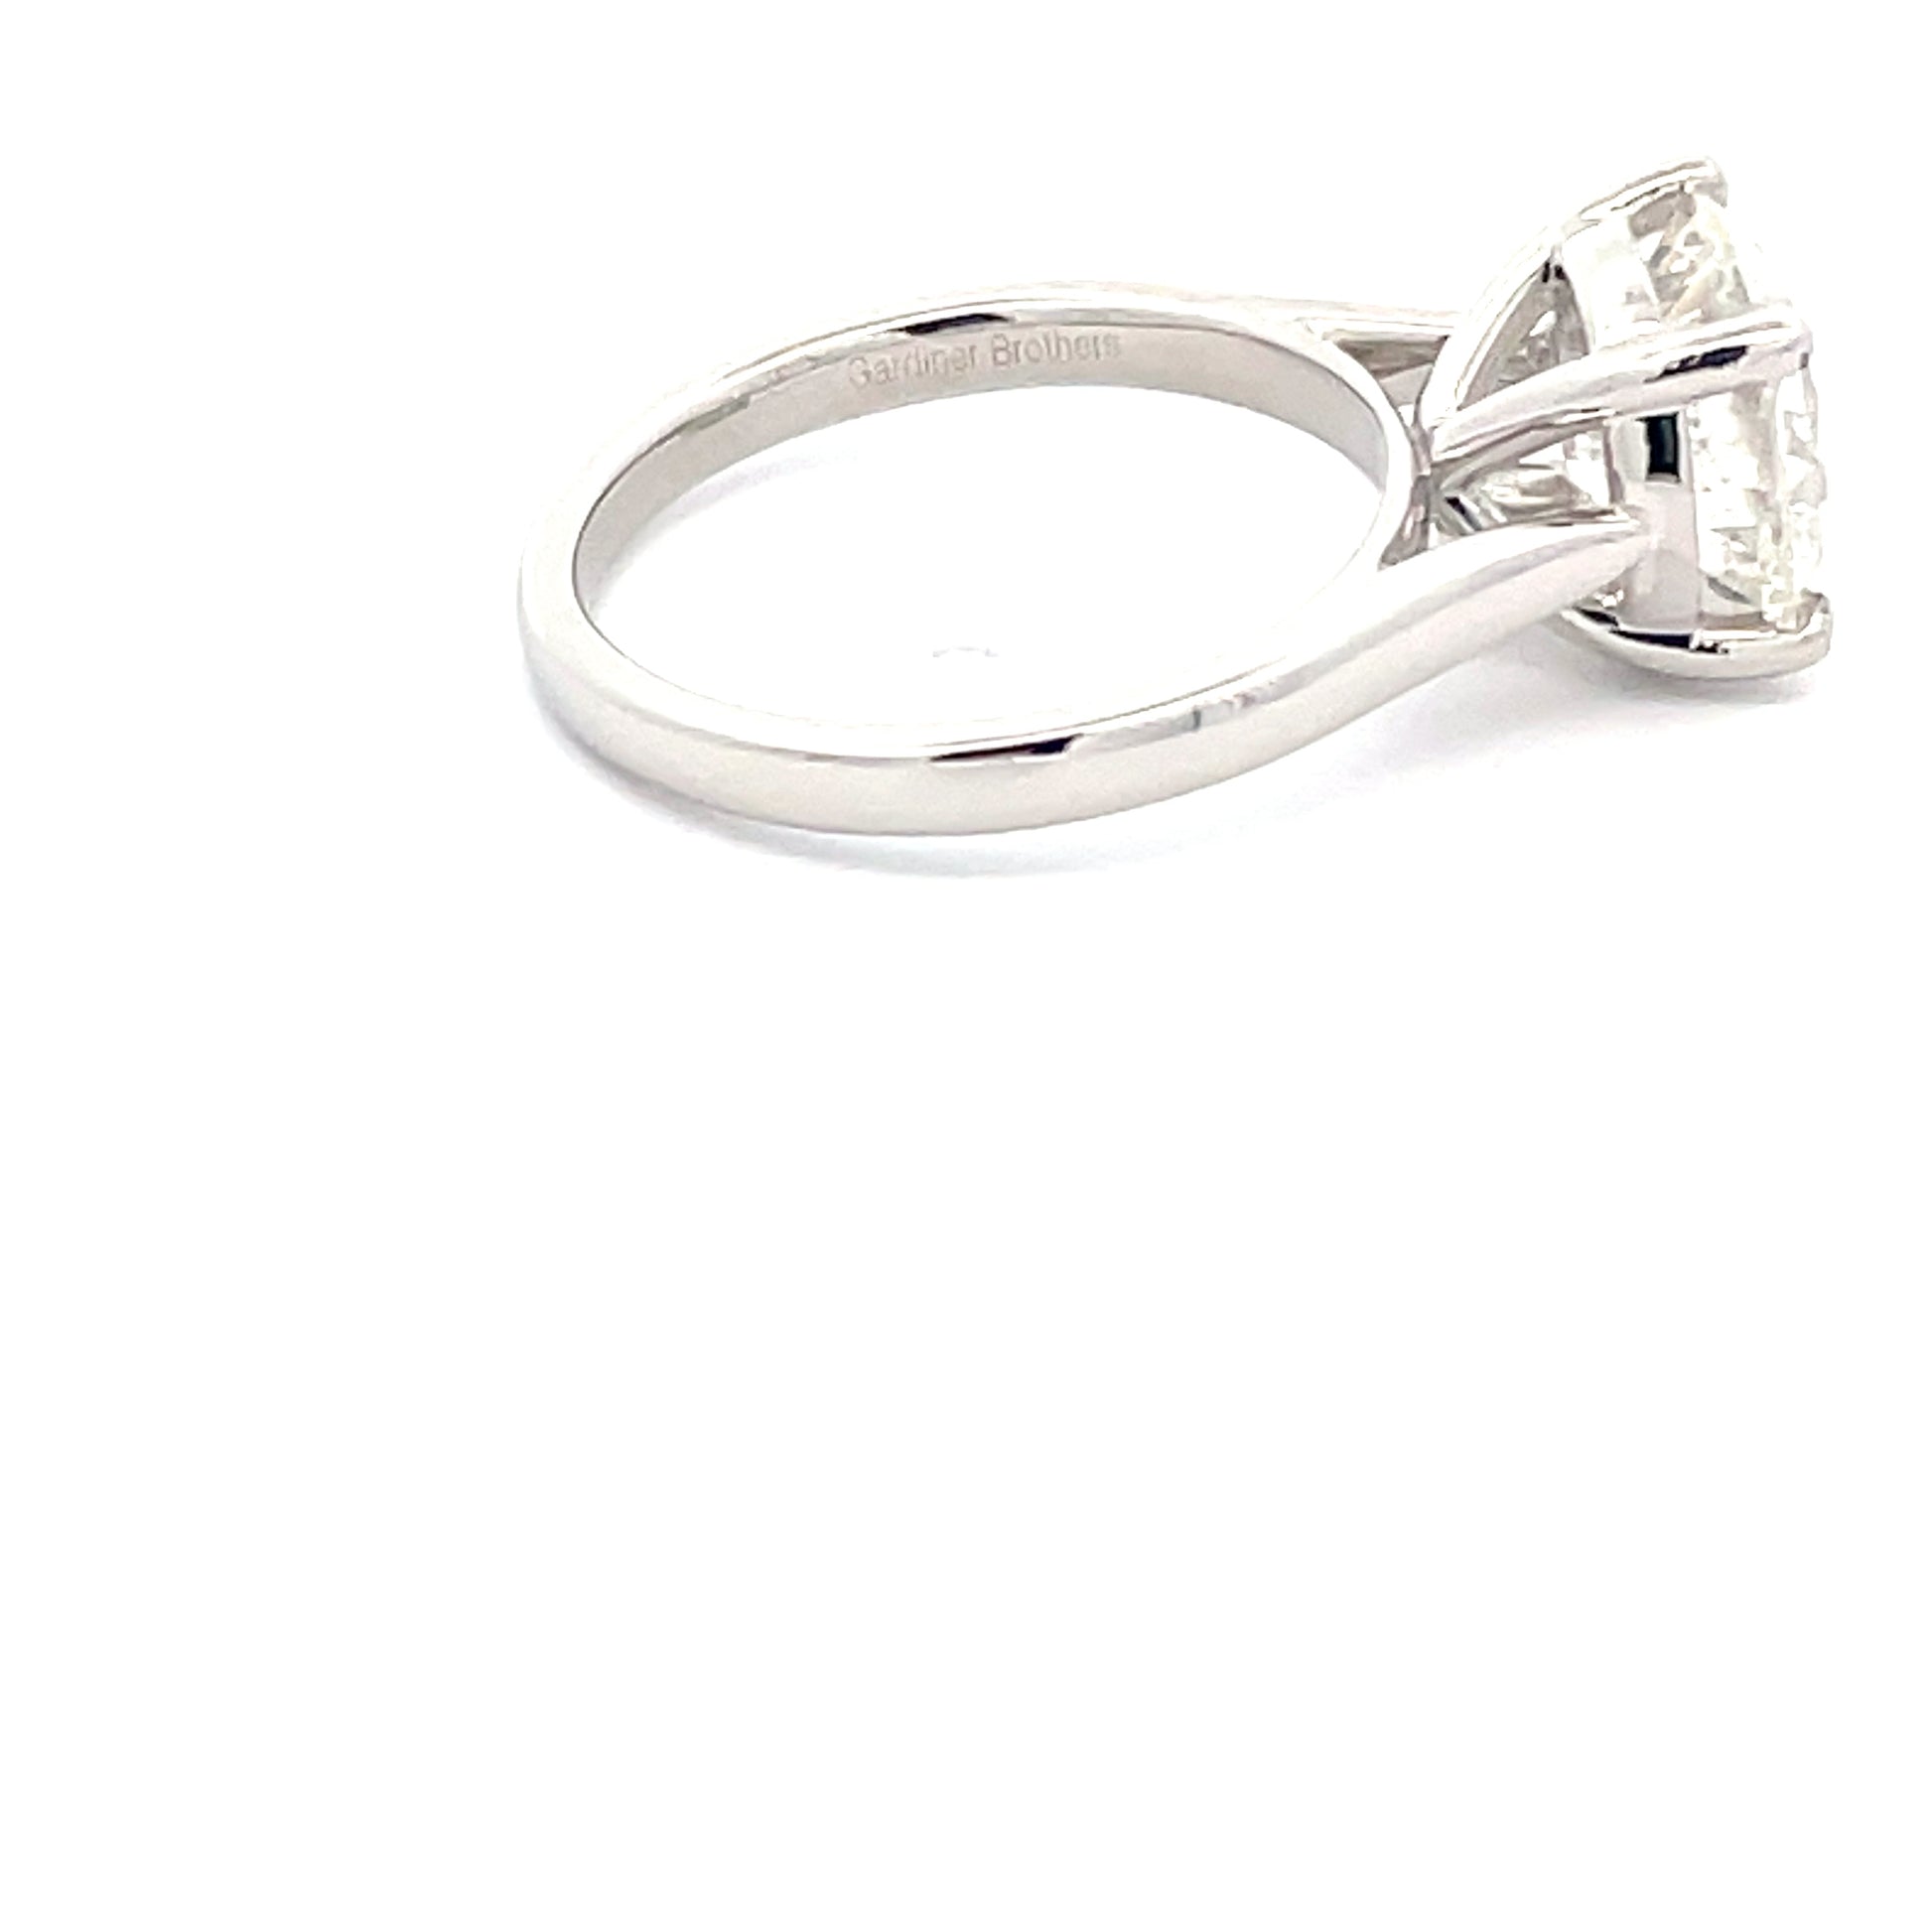 Round Brilliant Cut Diamond Solitaire Ring - 3.02cts  Gardiner Brothers   